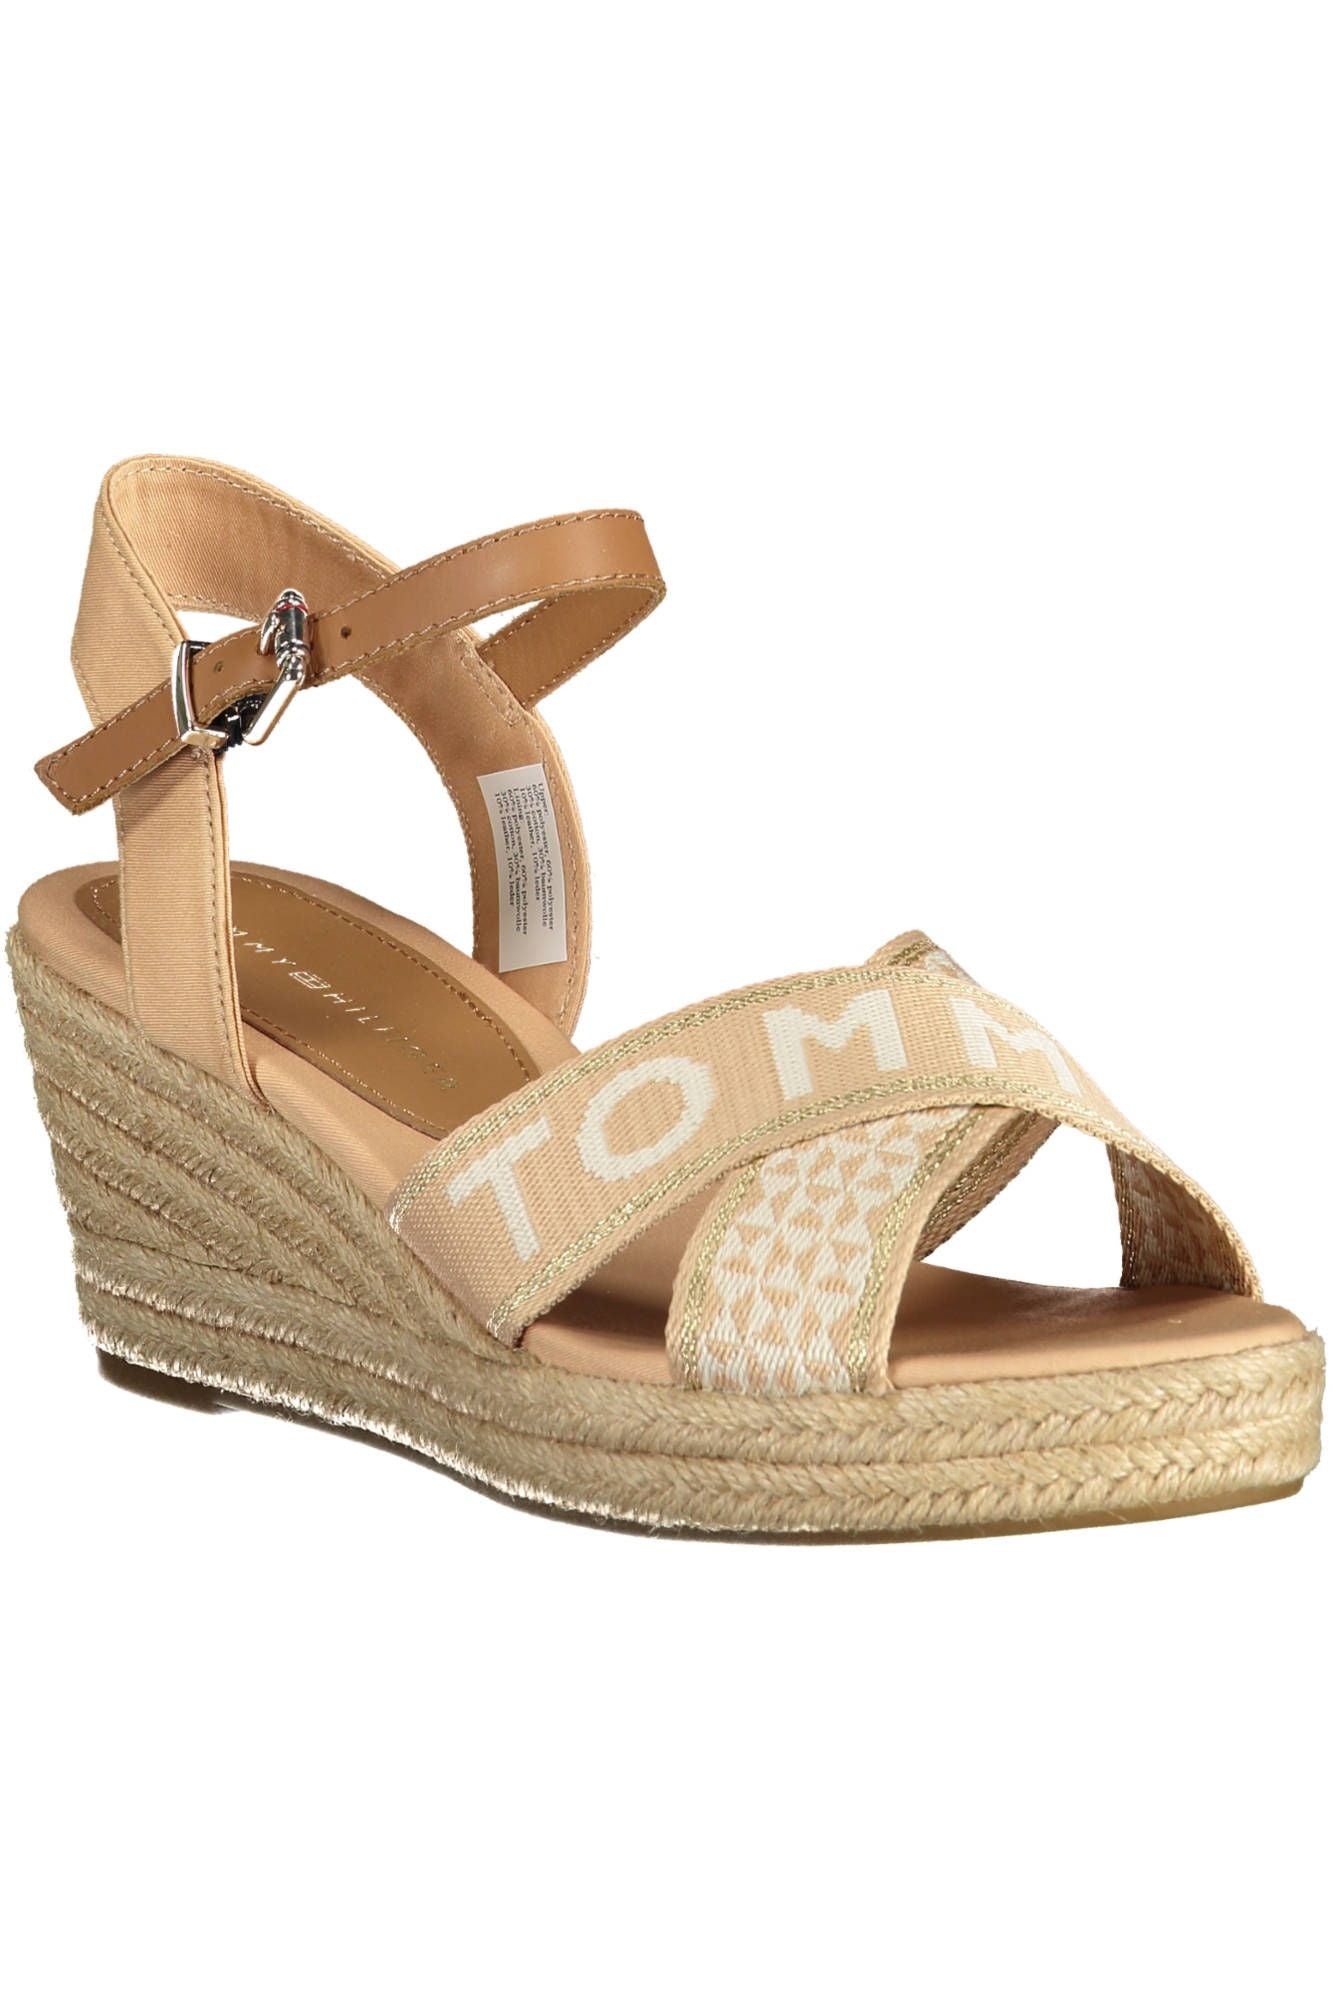 Beige Ankle Strap Wedge Sandal with Logo Accent